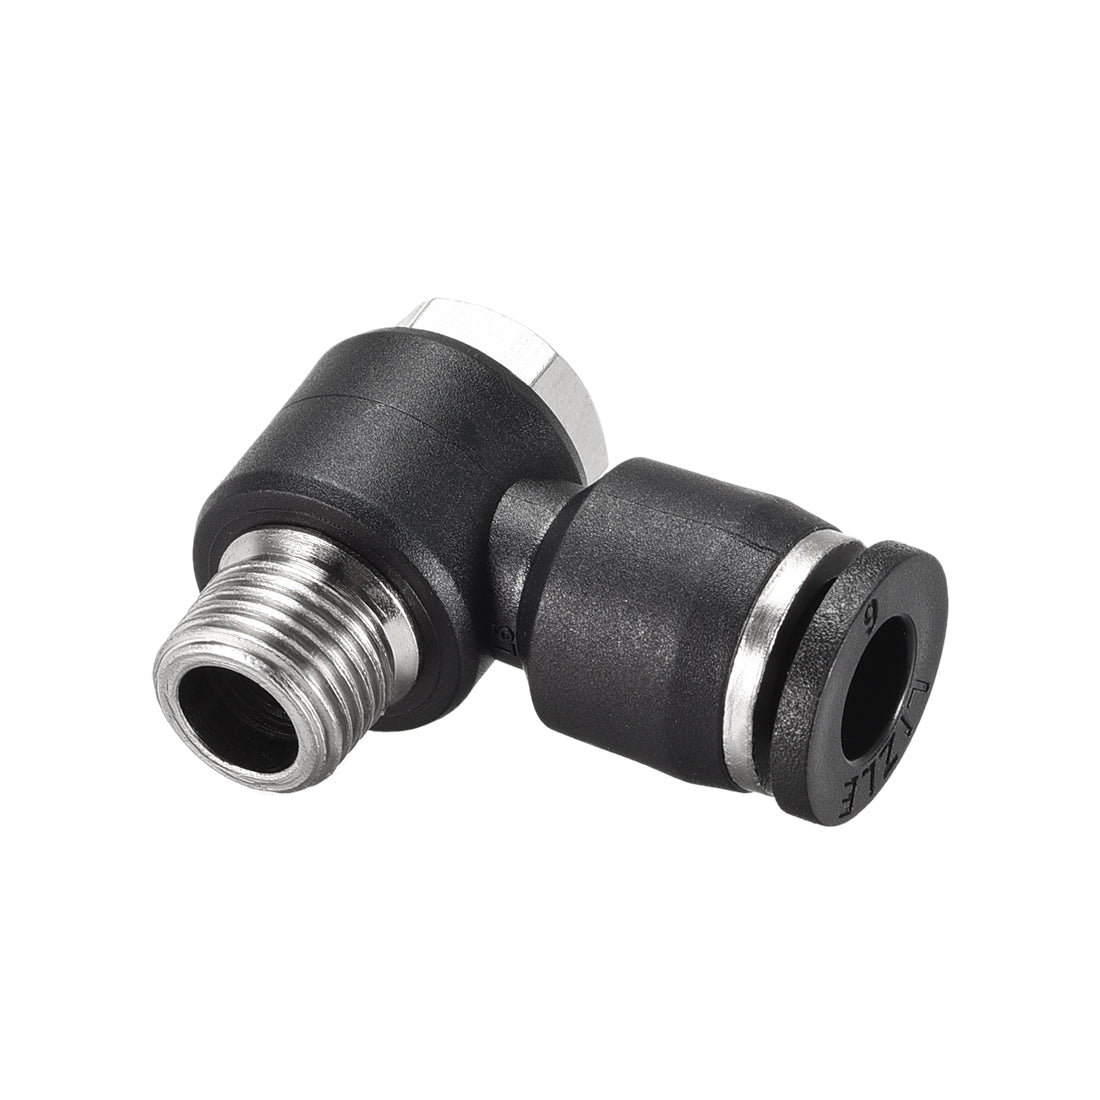 uxcell Uxcell Pneumatic Push to Connect Tube Fitting 6mm Tube to 1/8NPT Male Thread Elbow 5Pcs